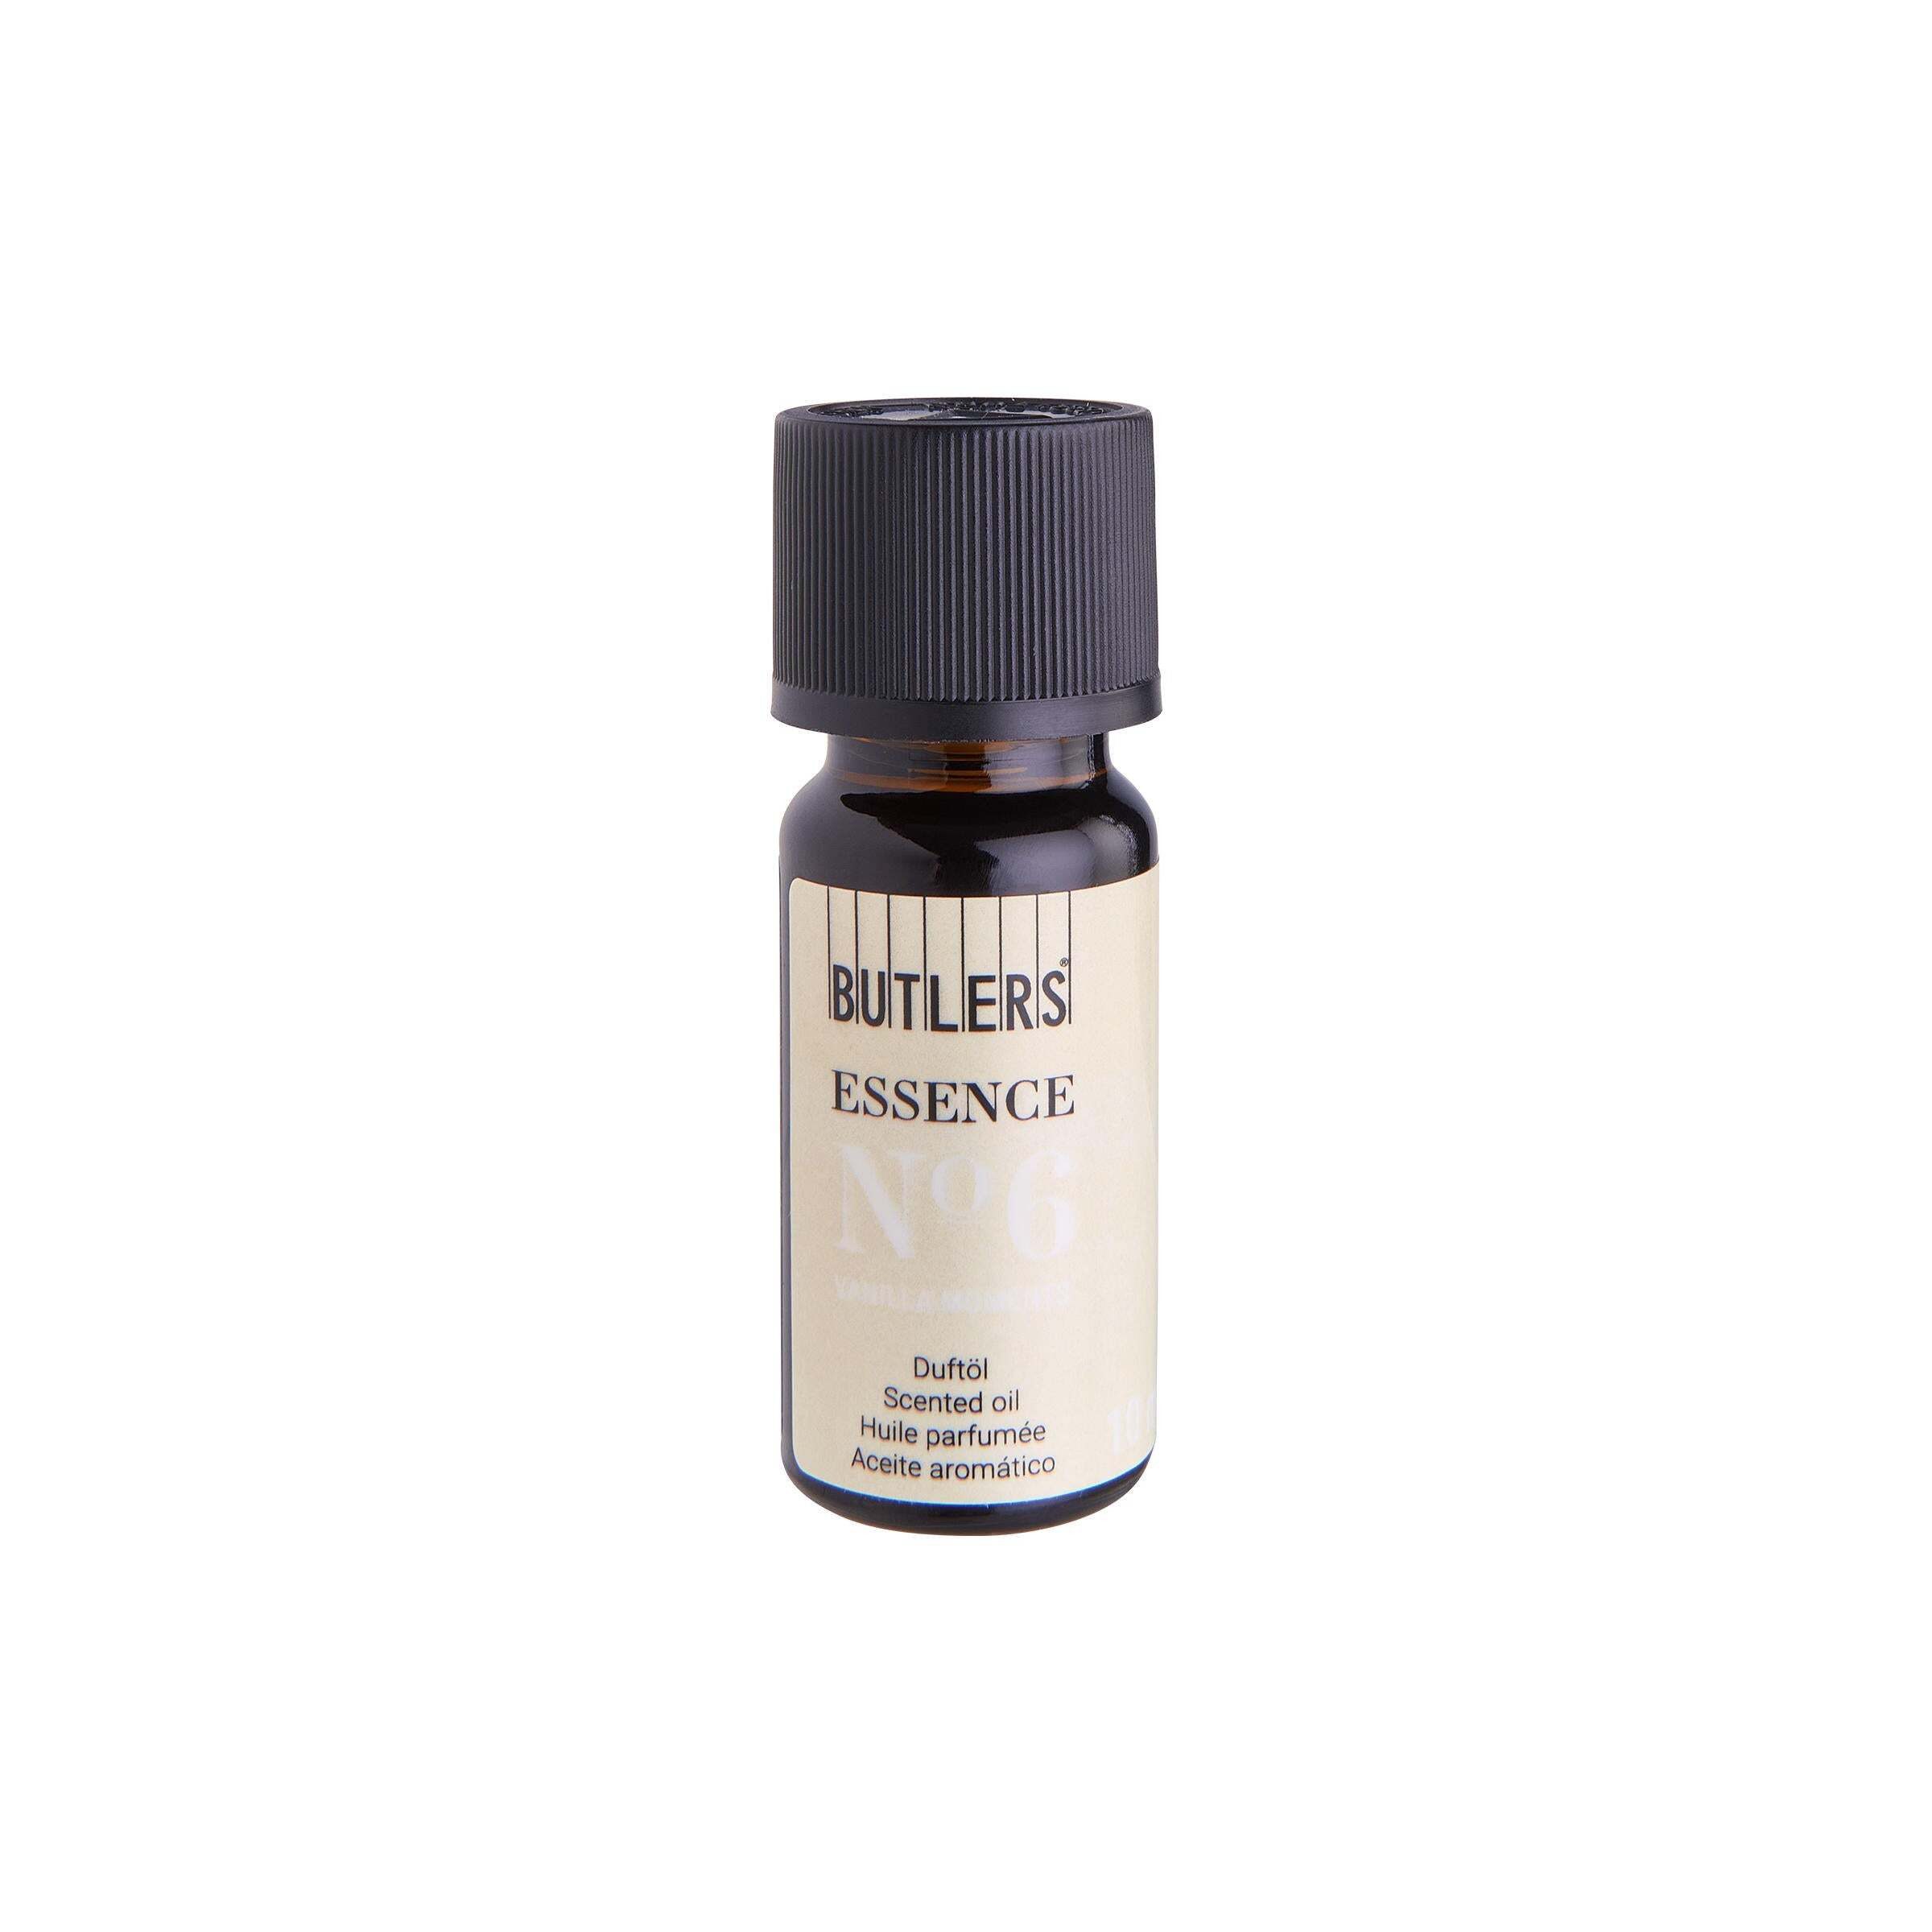 BUTLERS Duftlampe ESSENCE Duftöl No 6 "Vanilla Moments" 10ml